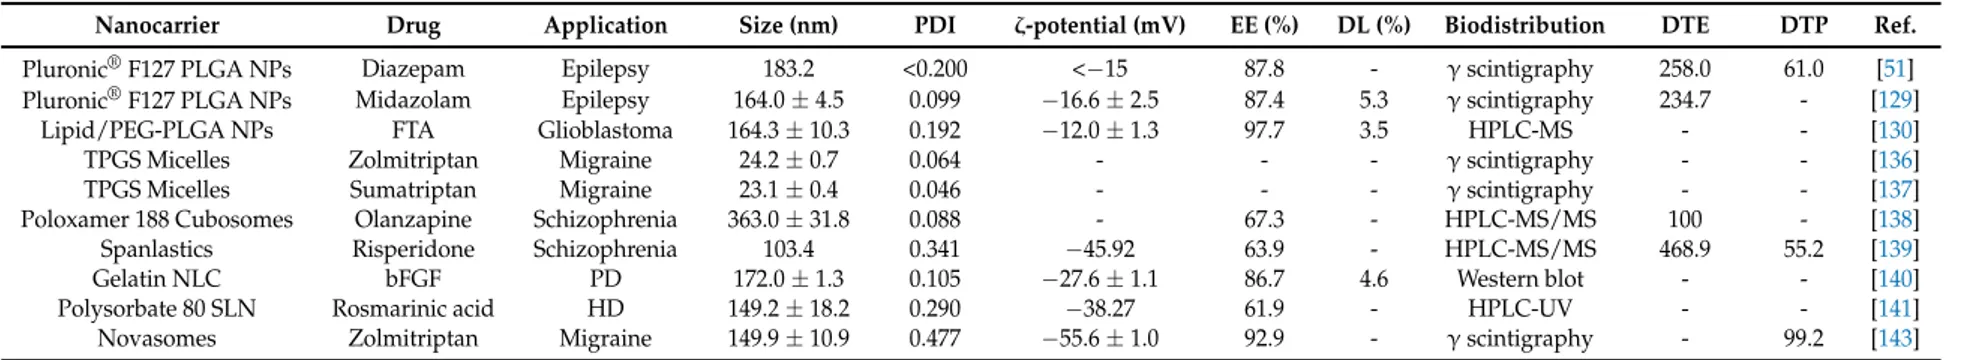 Table 2. Mucus-penetrating and penetration-enhancing nanocarriers studied for nose-to-brain delivery.